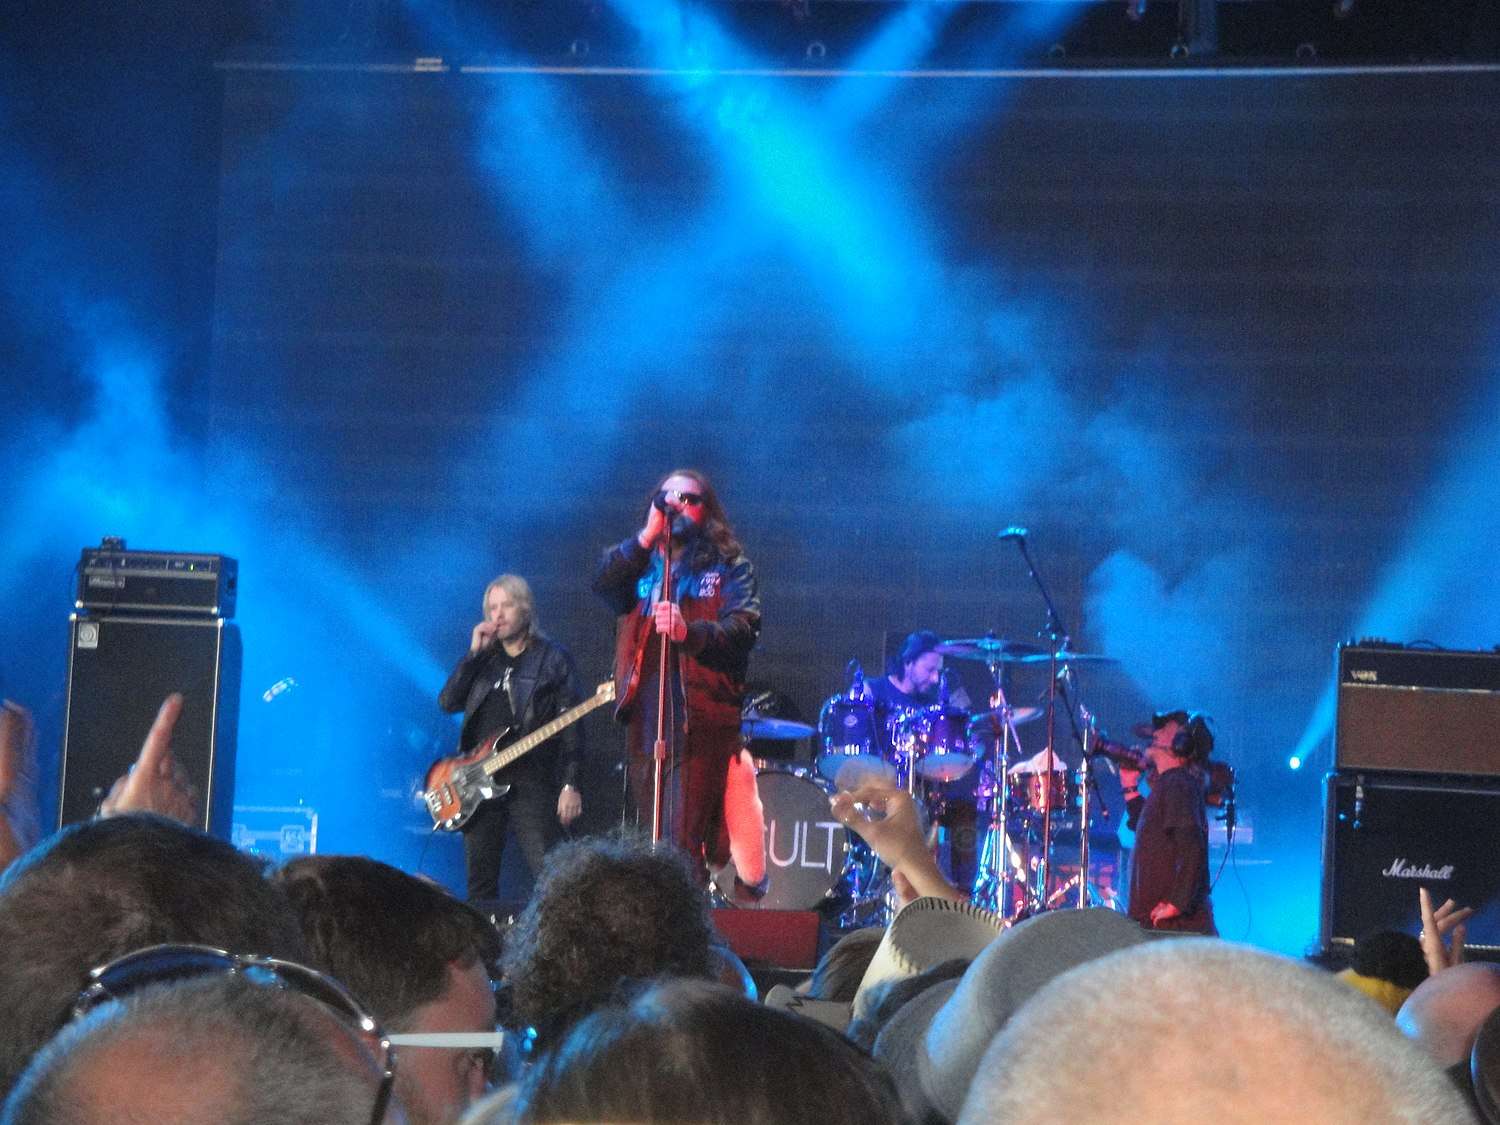 The_Cult_performing_at_Isle_of_Wight_Festival_2011.JPG